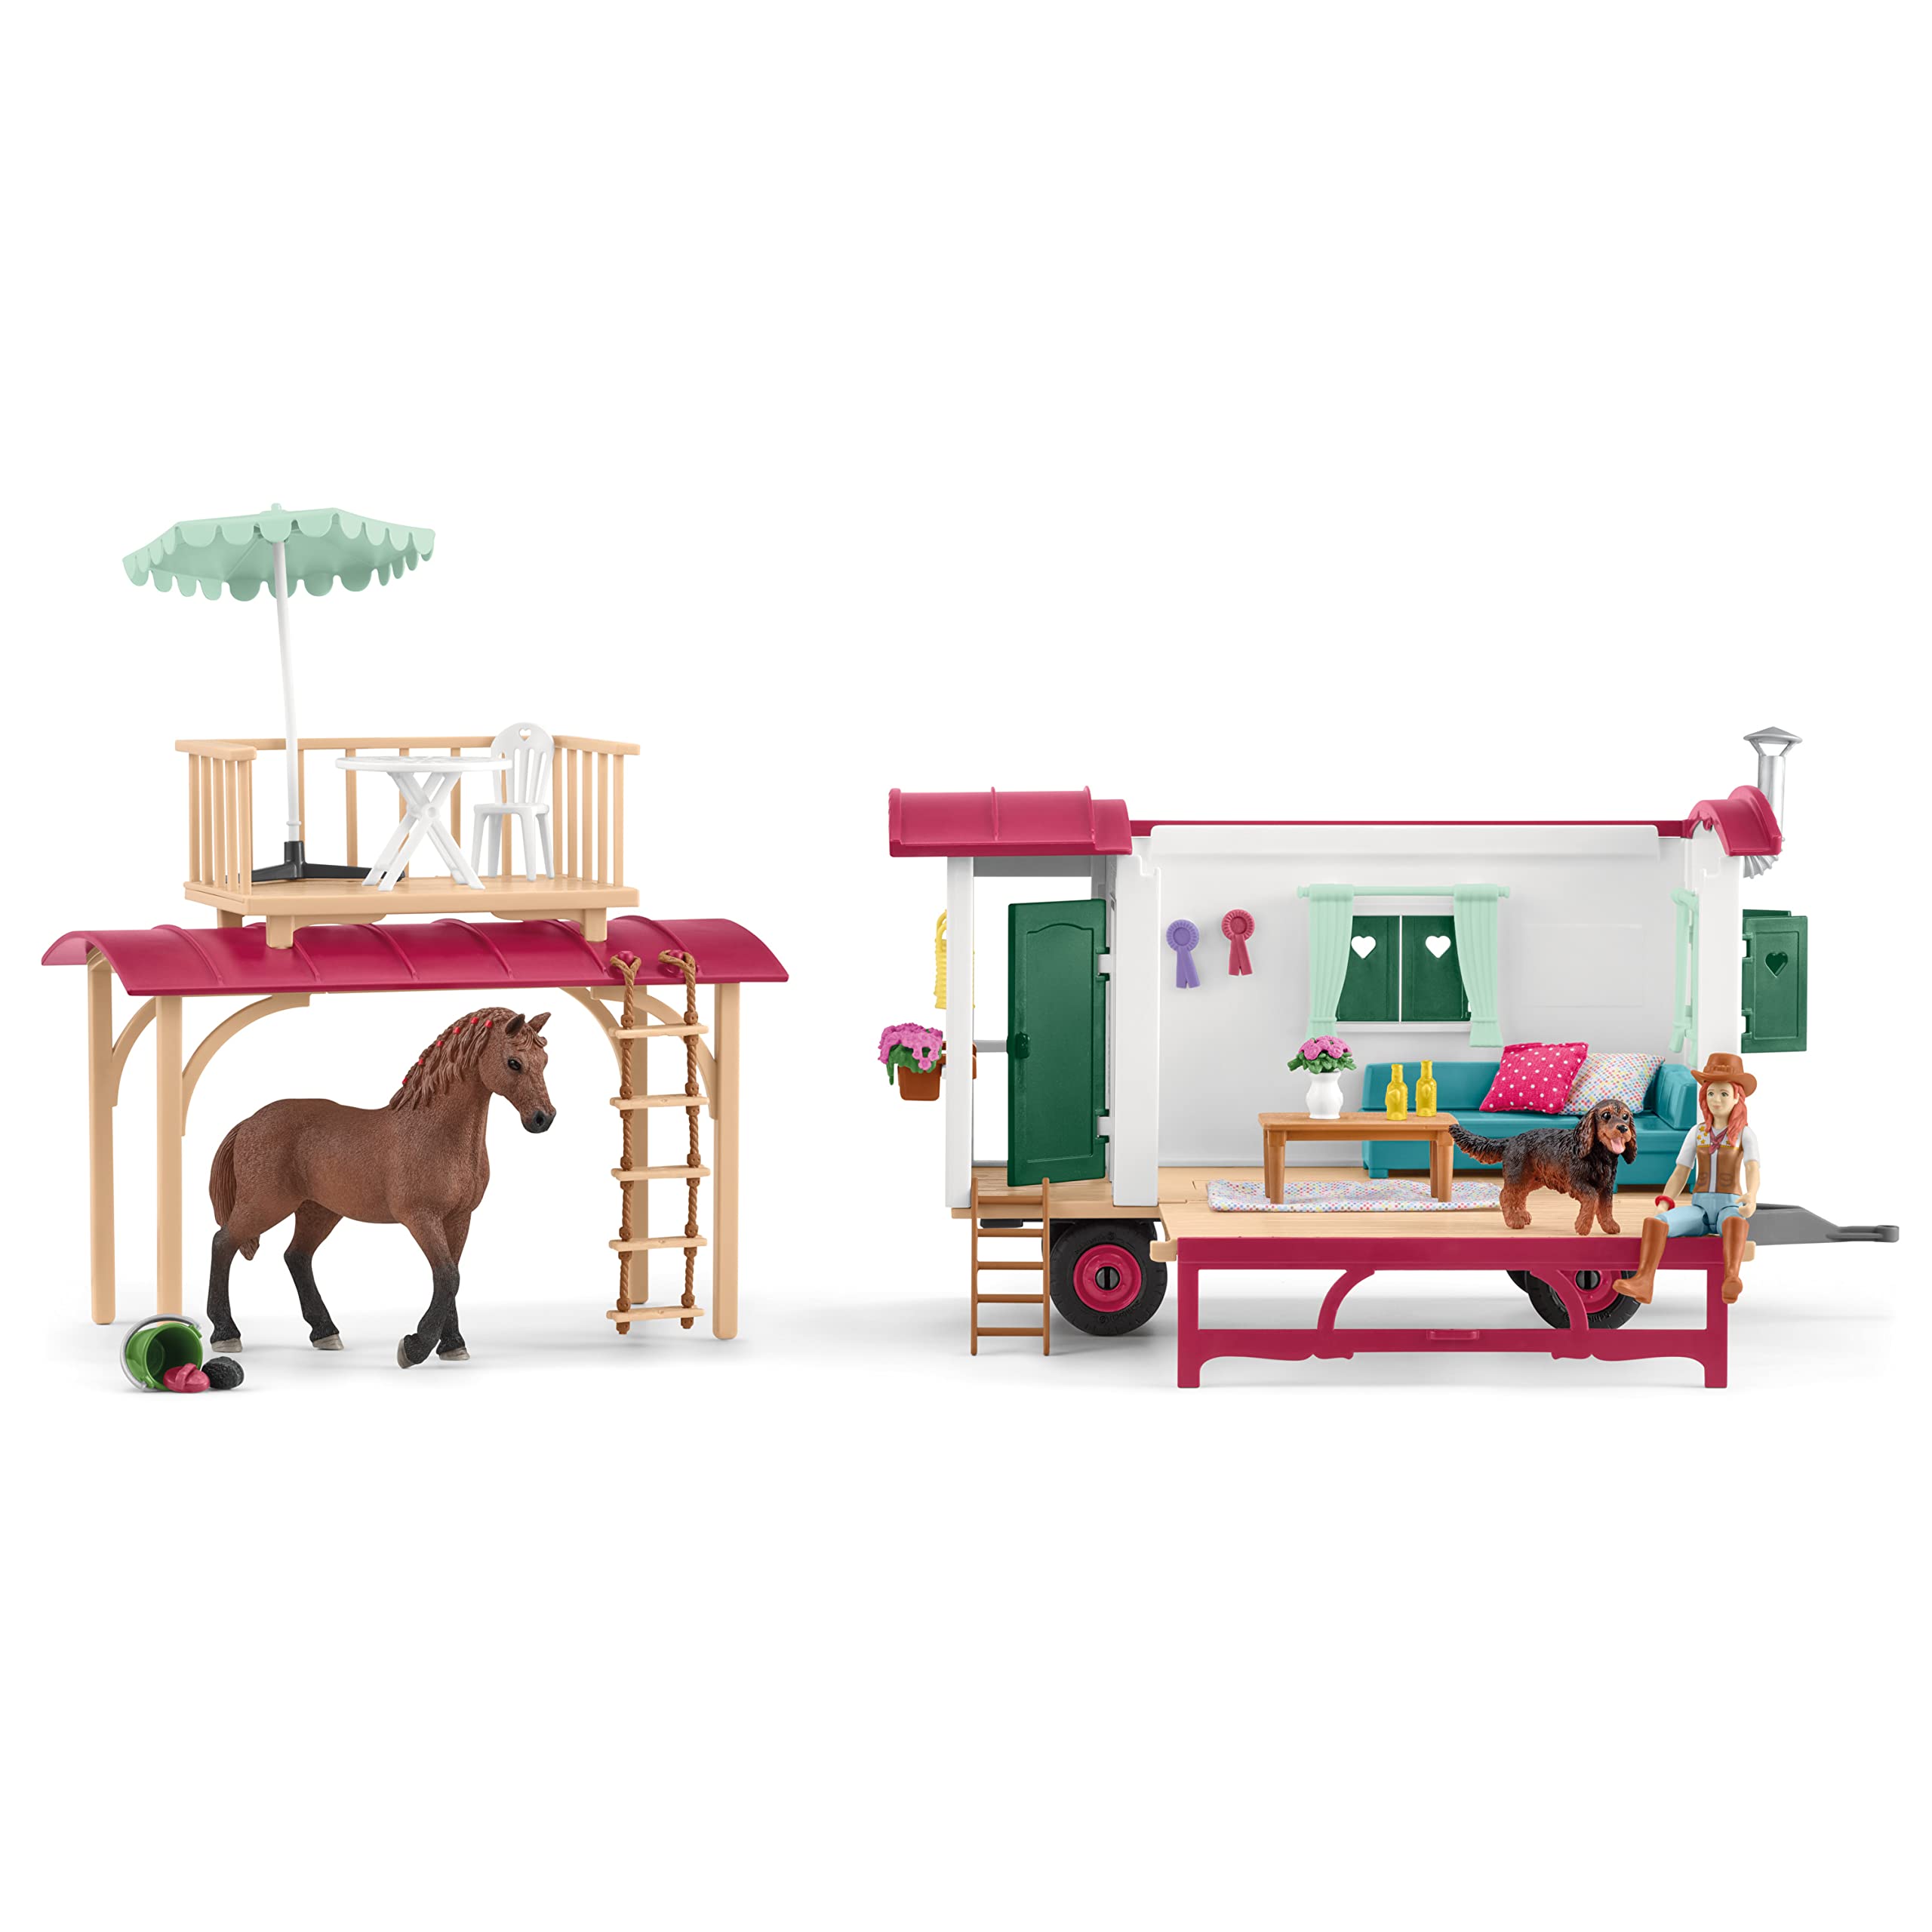 Schleich Horse Club, Horse Toys for Girls and Boys, Camping Trip with Camper Playset